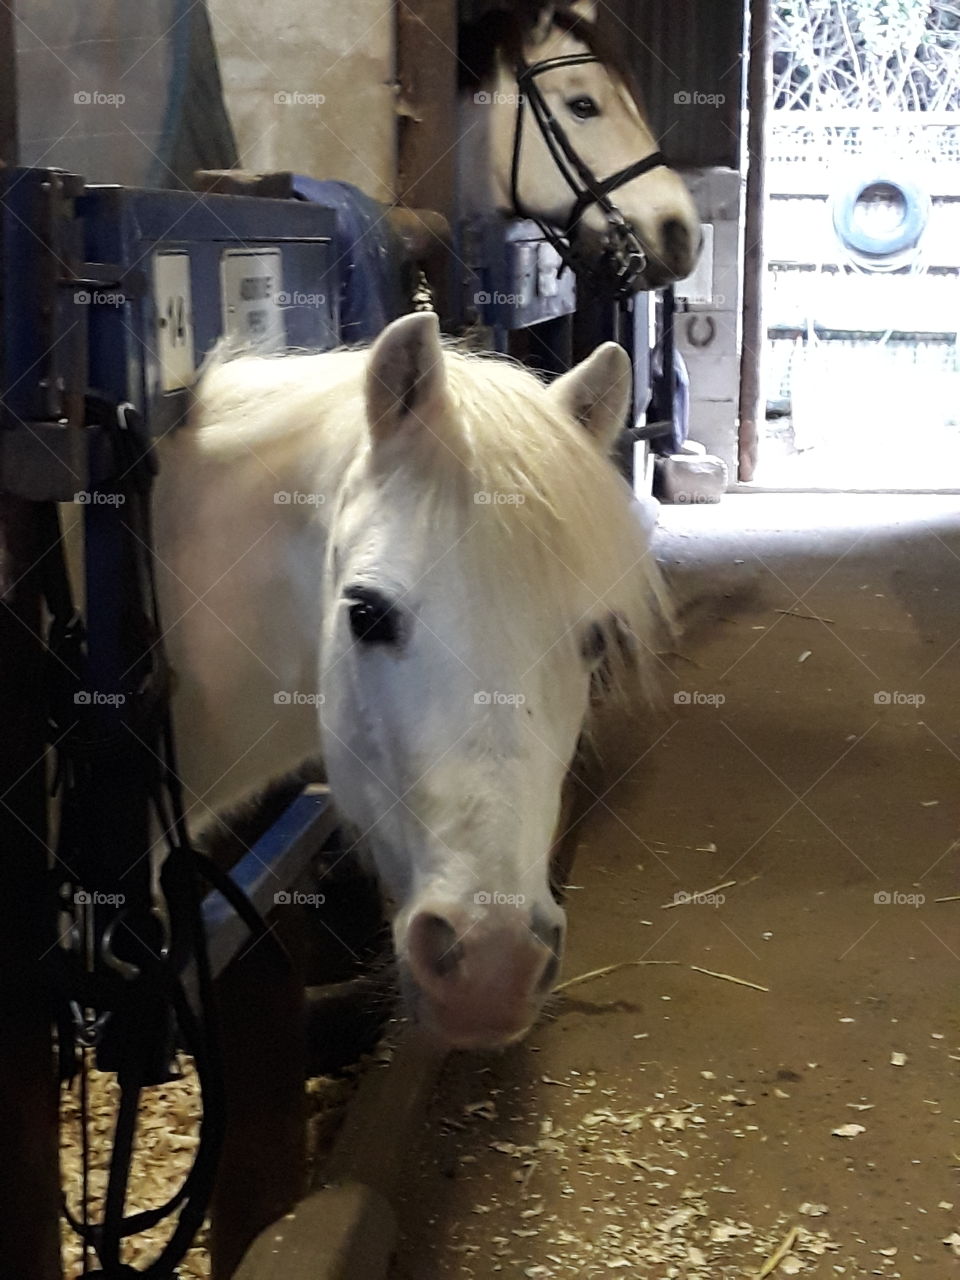 beautiful white horse at the stables